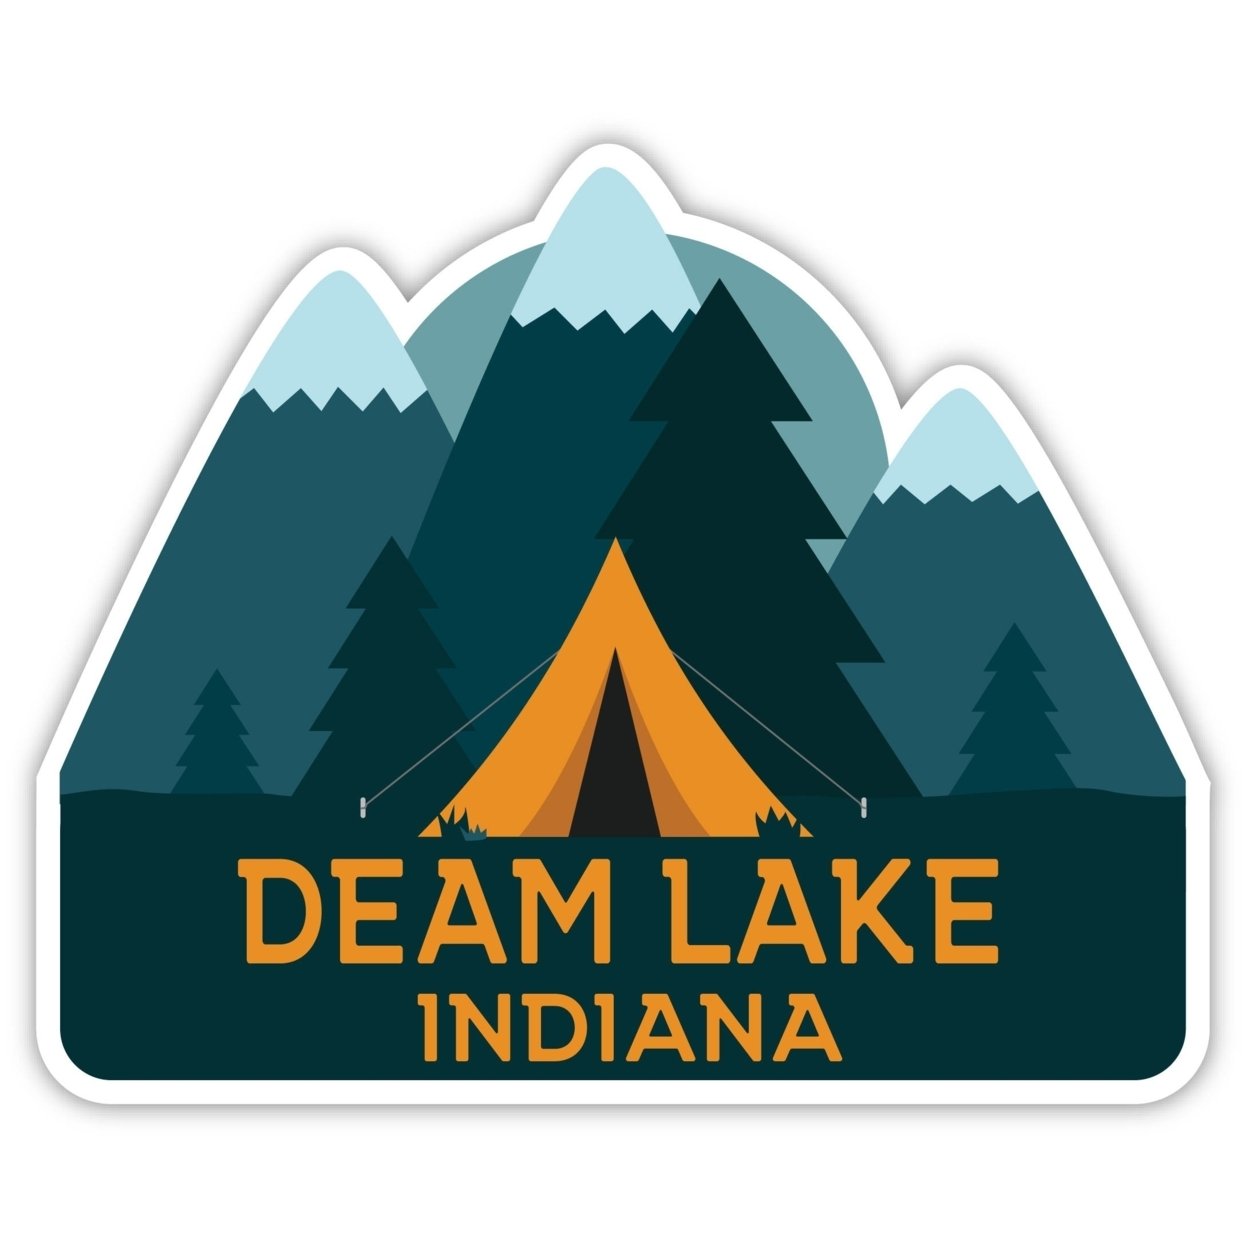 Deam Lake Indiana Souvenir Decorative Stickers (Choose Theme And Size) - 4-Pack, 2-Inch, Tent